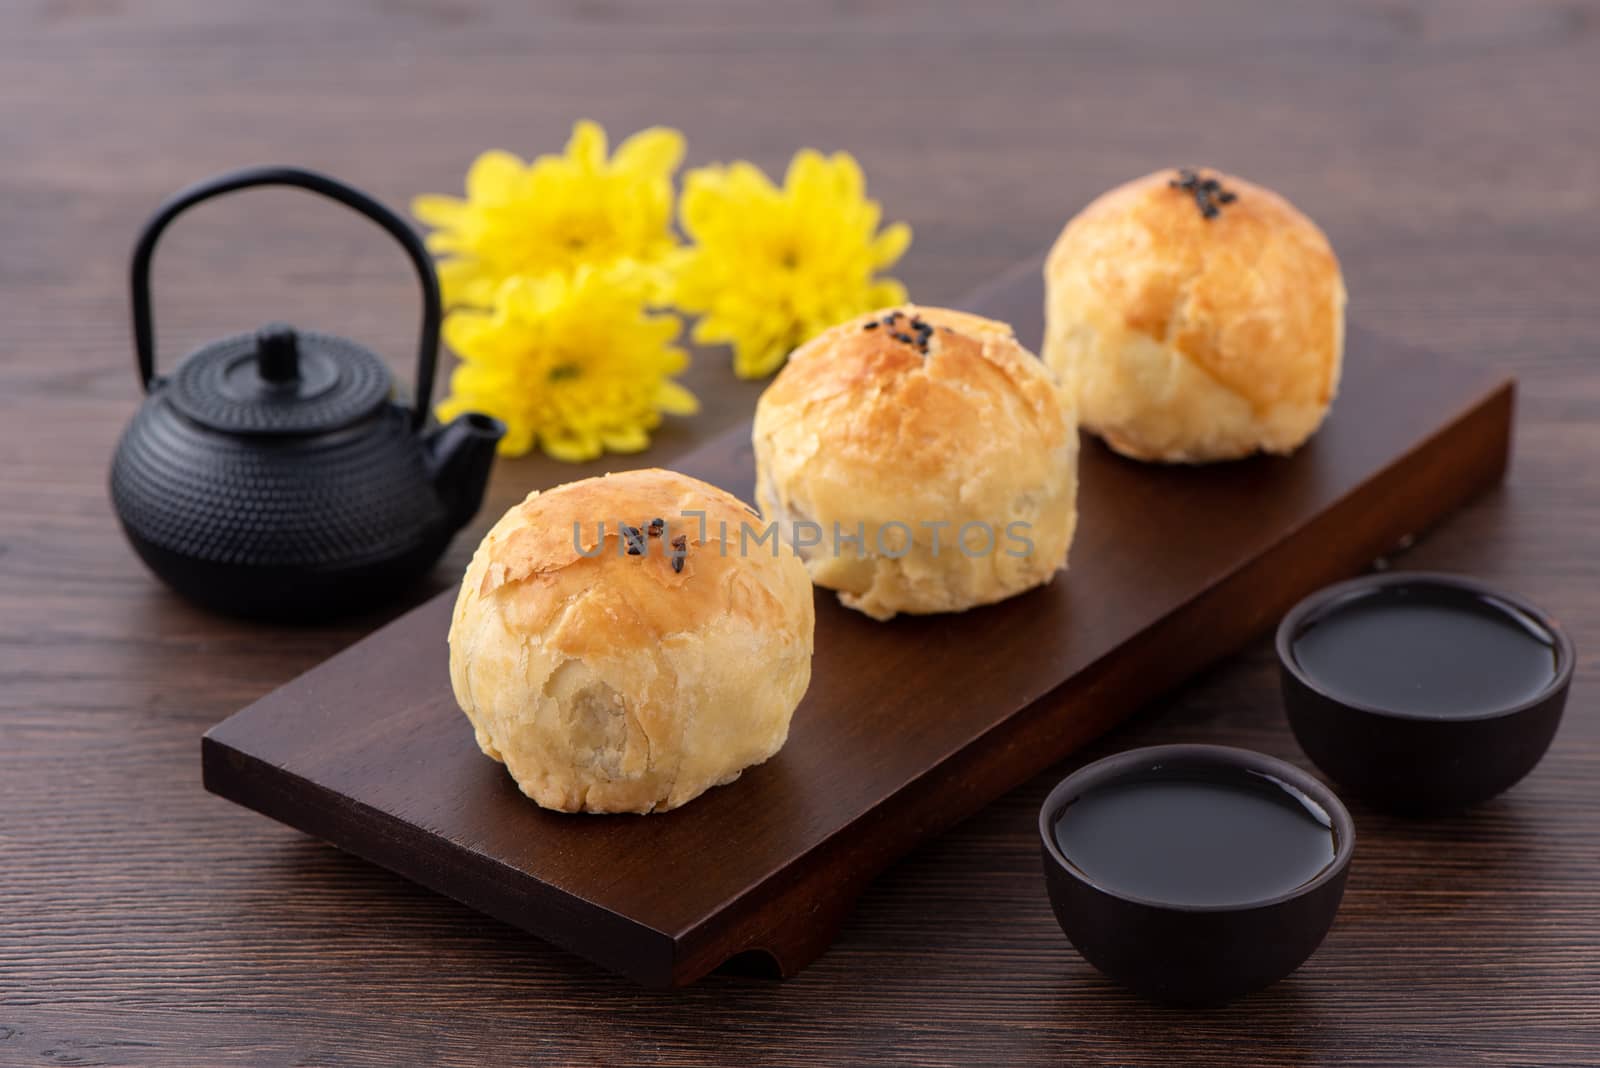 Moon cake yolk pastry, mooncake for Mid-Autumn Festival holiday, close up design concept on dark wooden table background